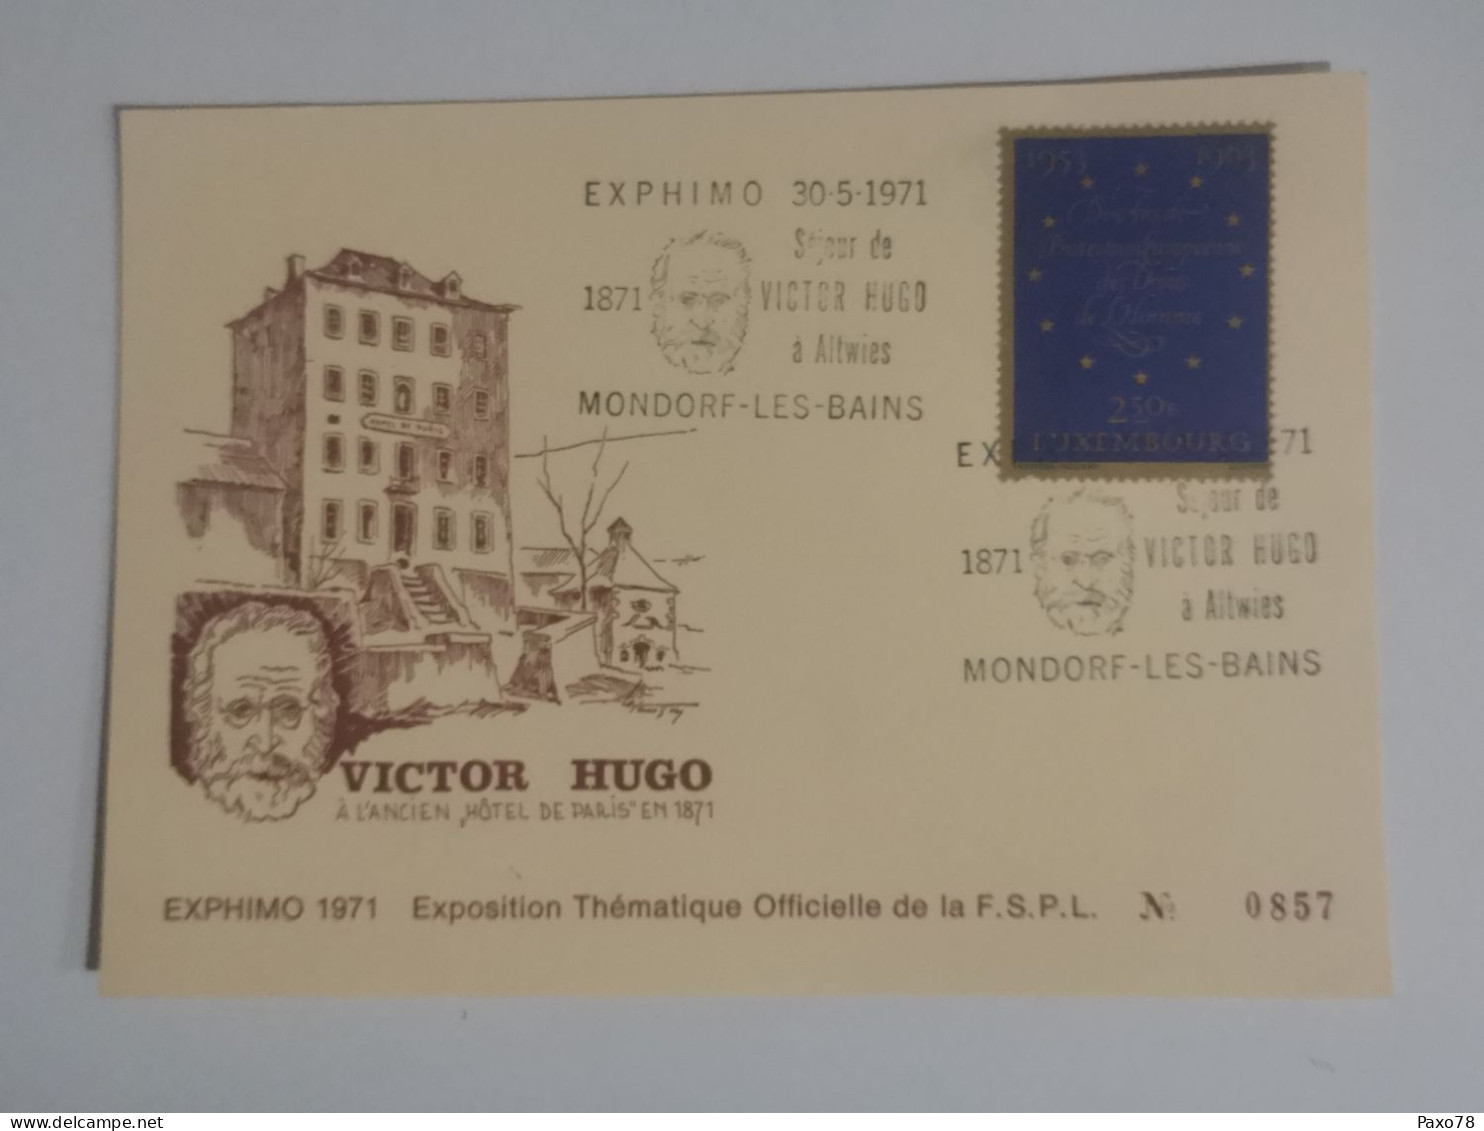 Victor Hugo, Exphimo 1971 - Commemoration Cards